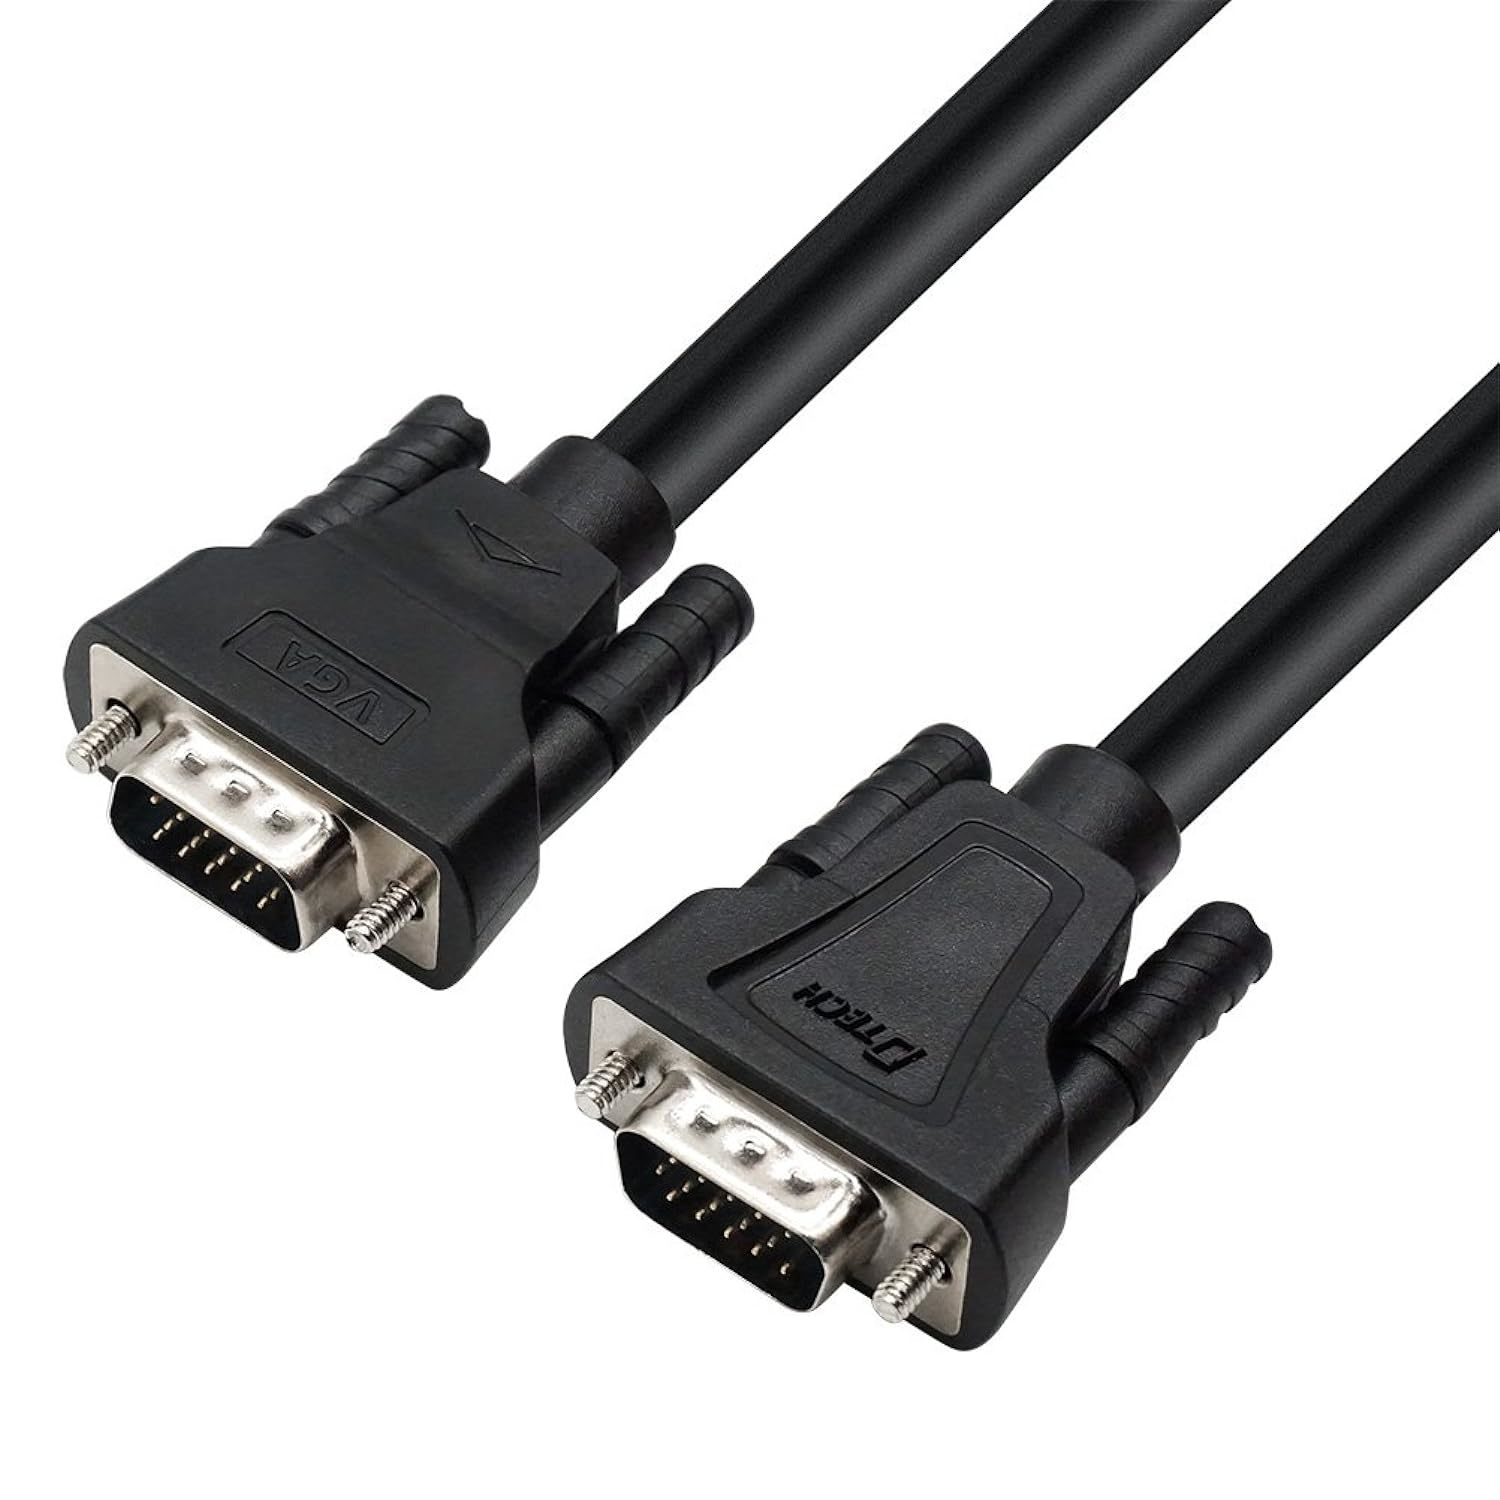 DTech VGA Male to Male Cable 10 Feet Long PC Computer Monitor Cord 1080p High Re - $26.99